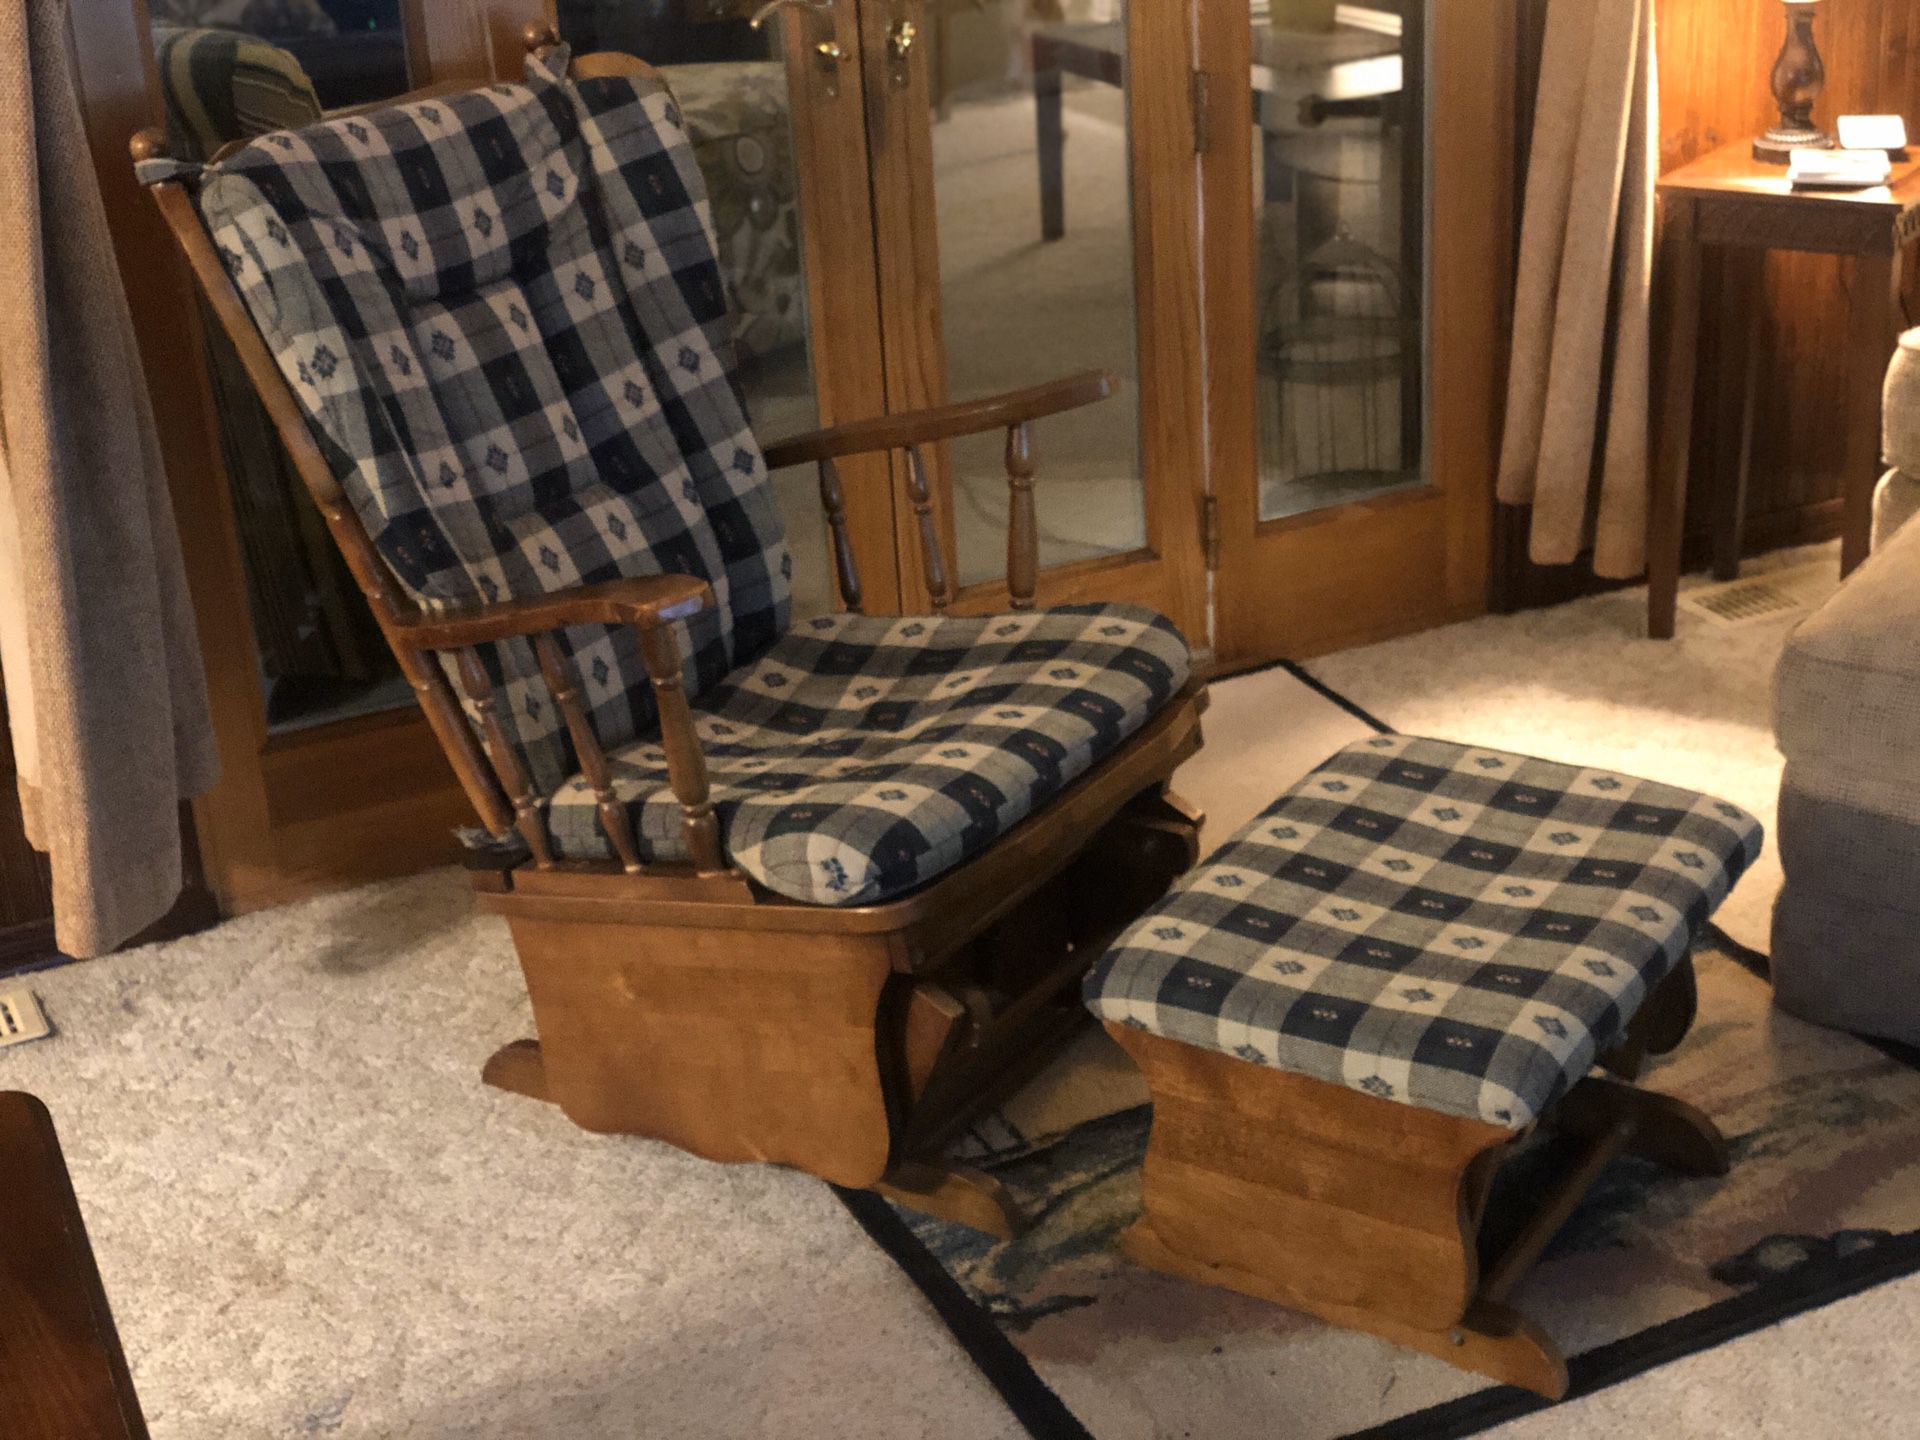 Rocking chair and ottoman